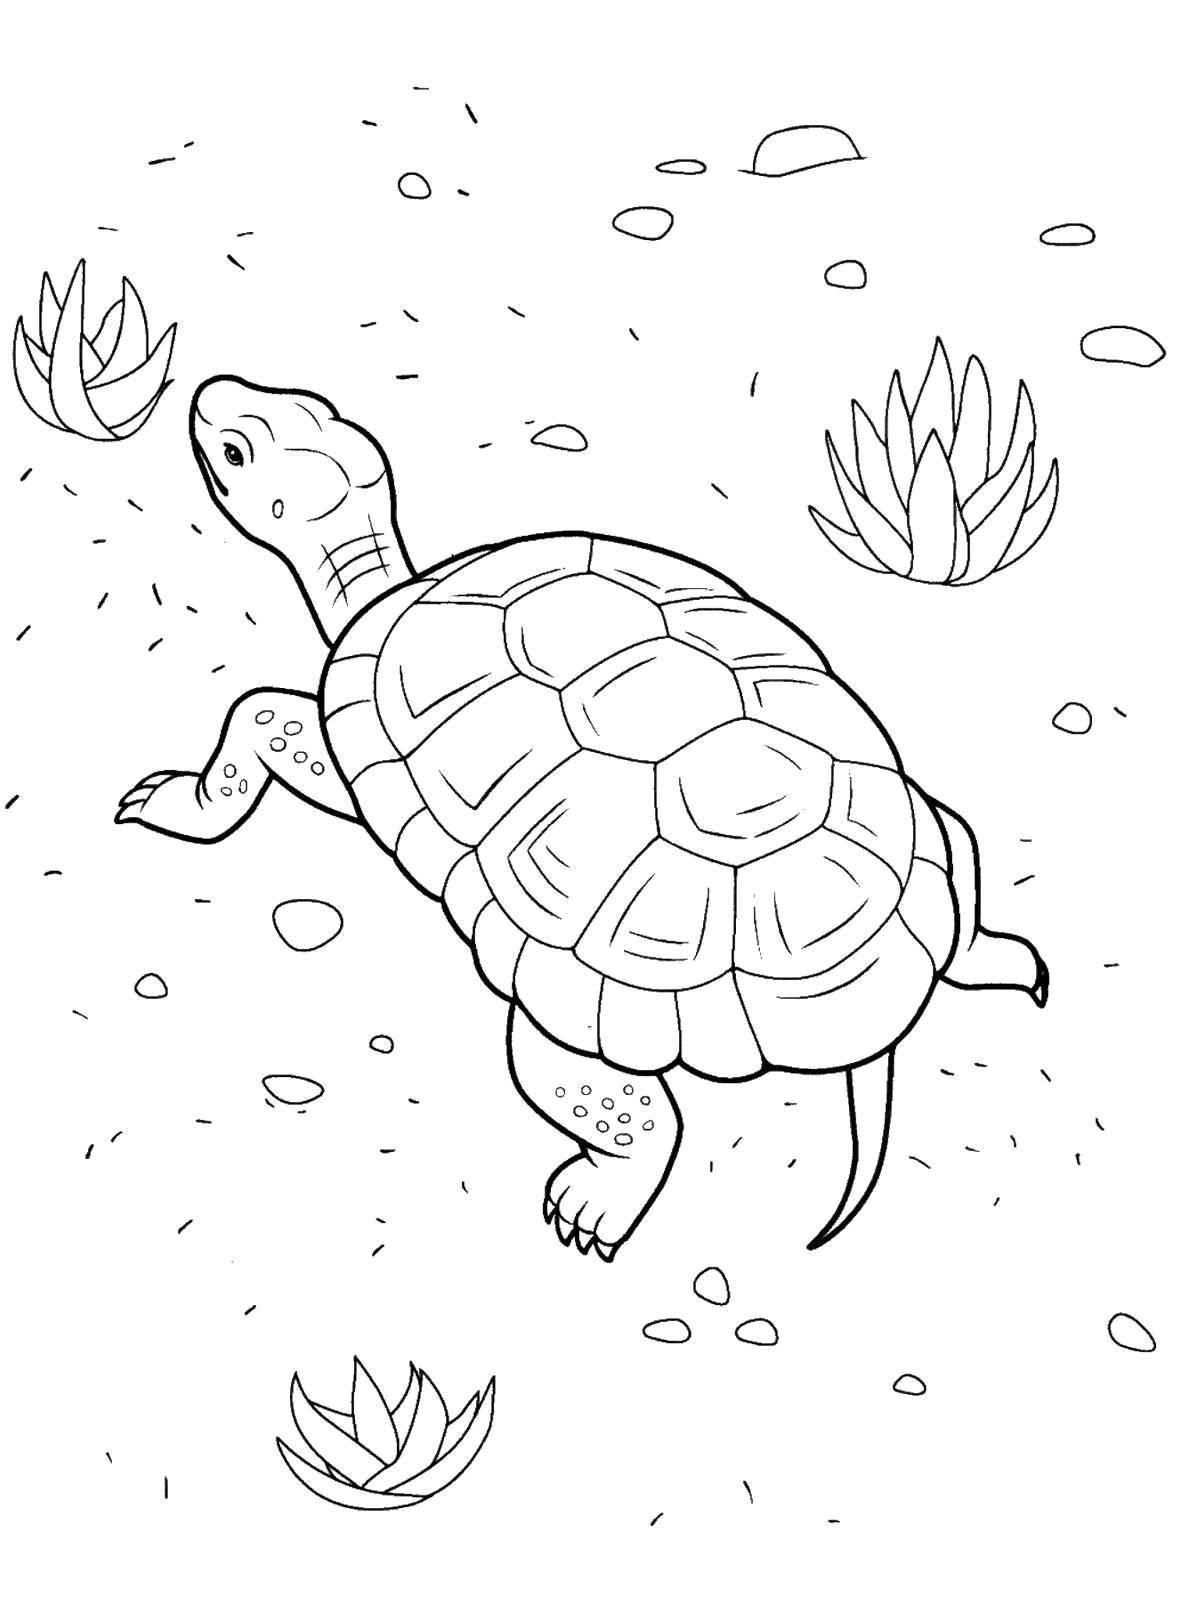 Coloring Turtle. Category reptiles. Tags:  Reptile, corephp.